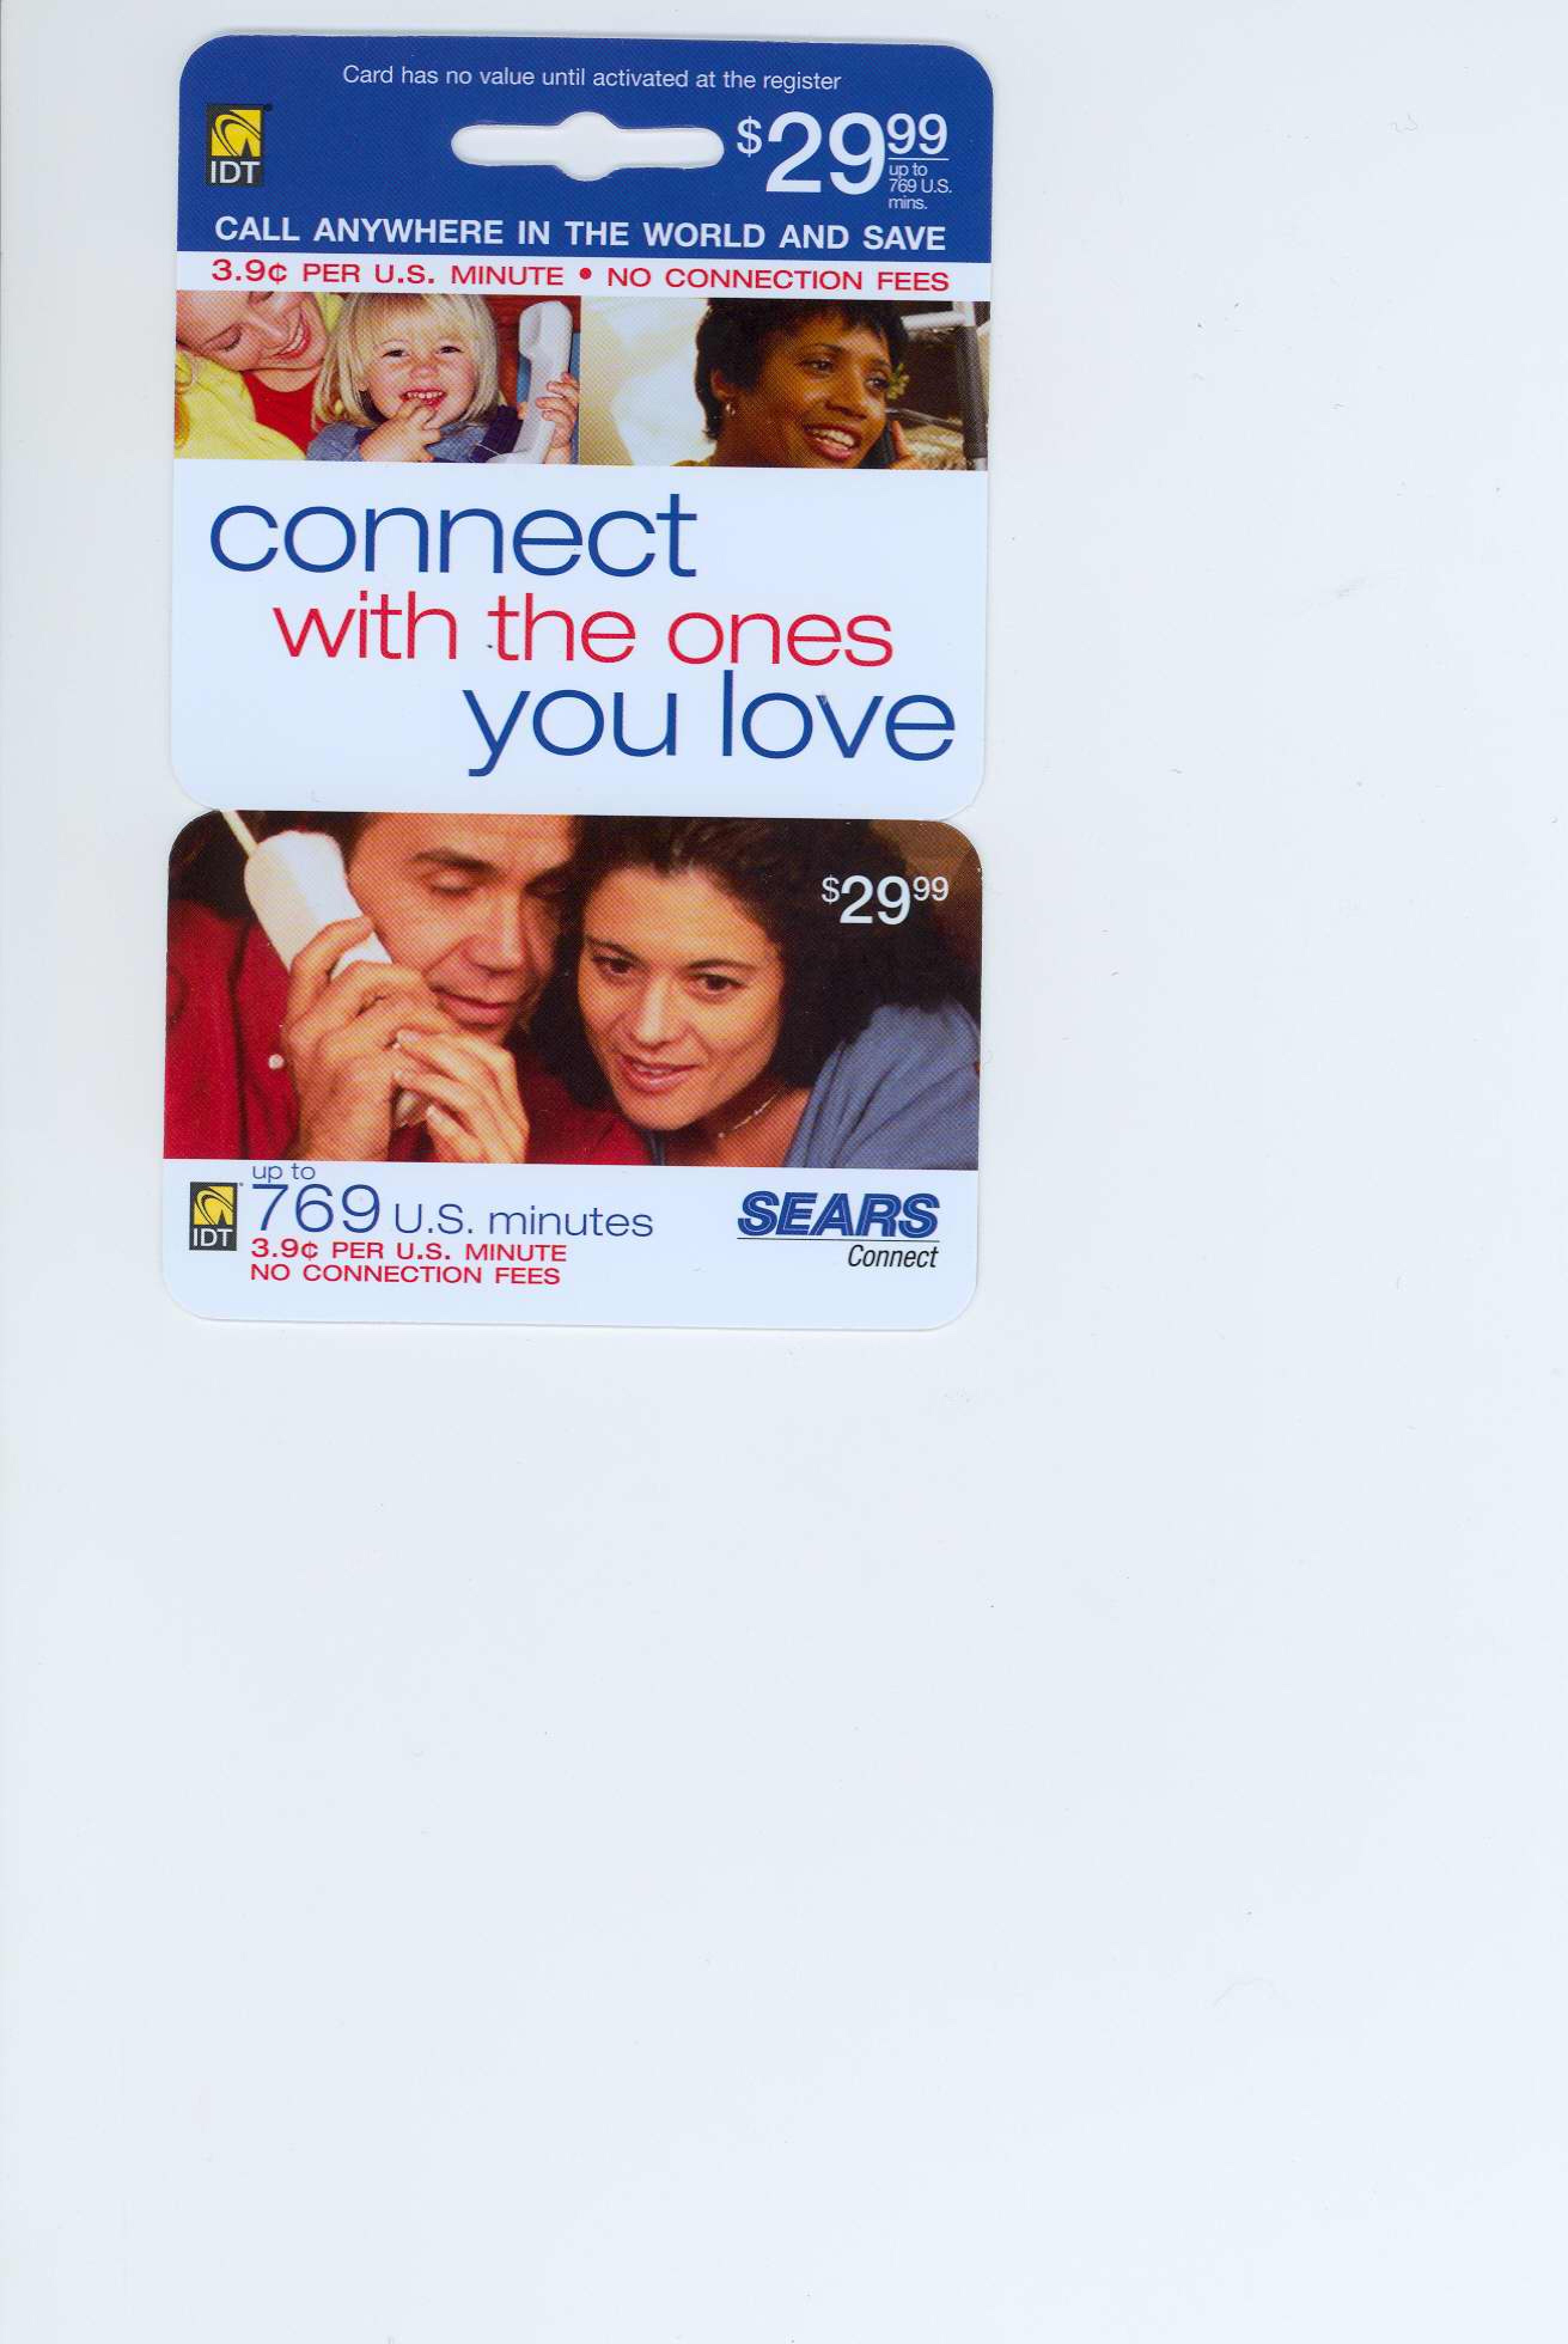  SEARS CONNECT